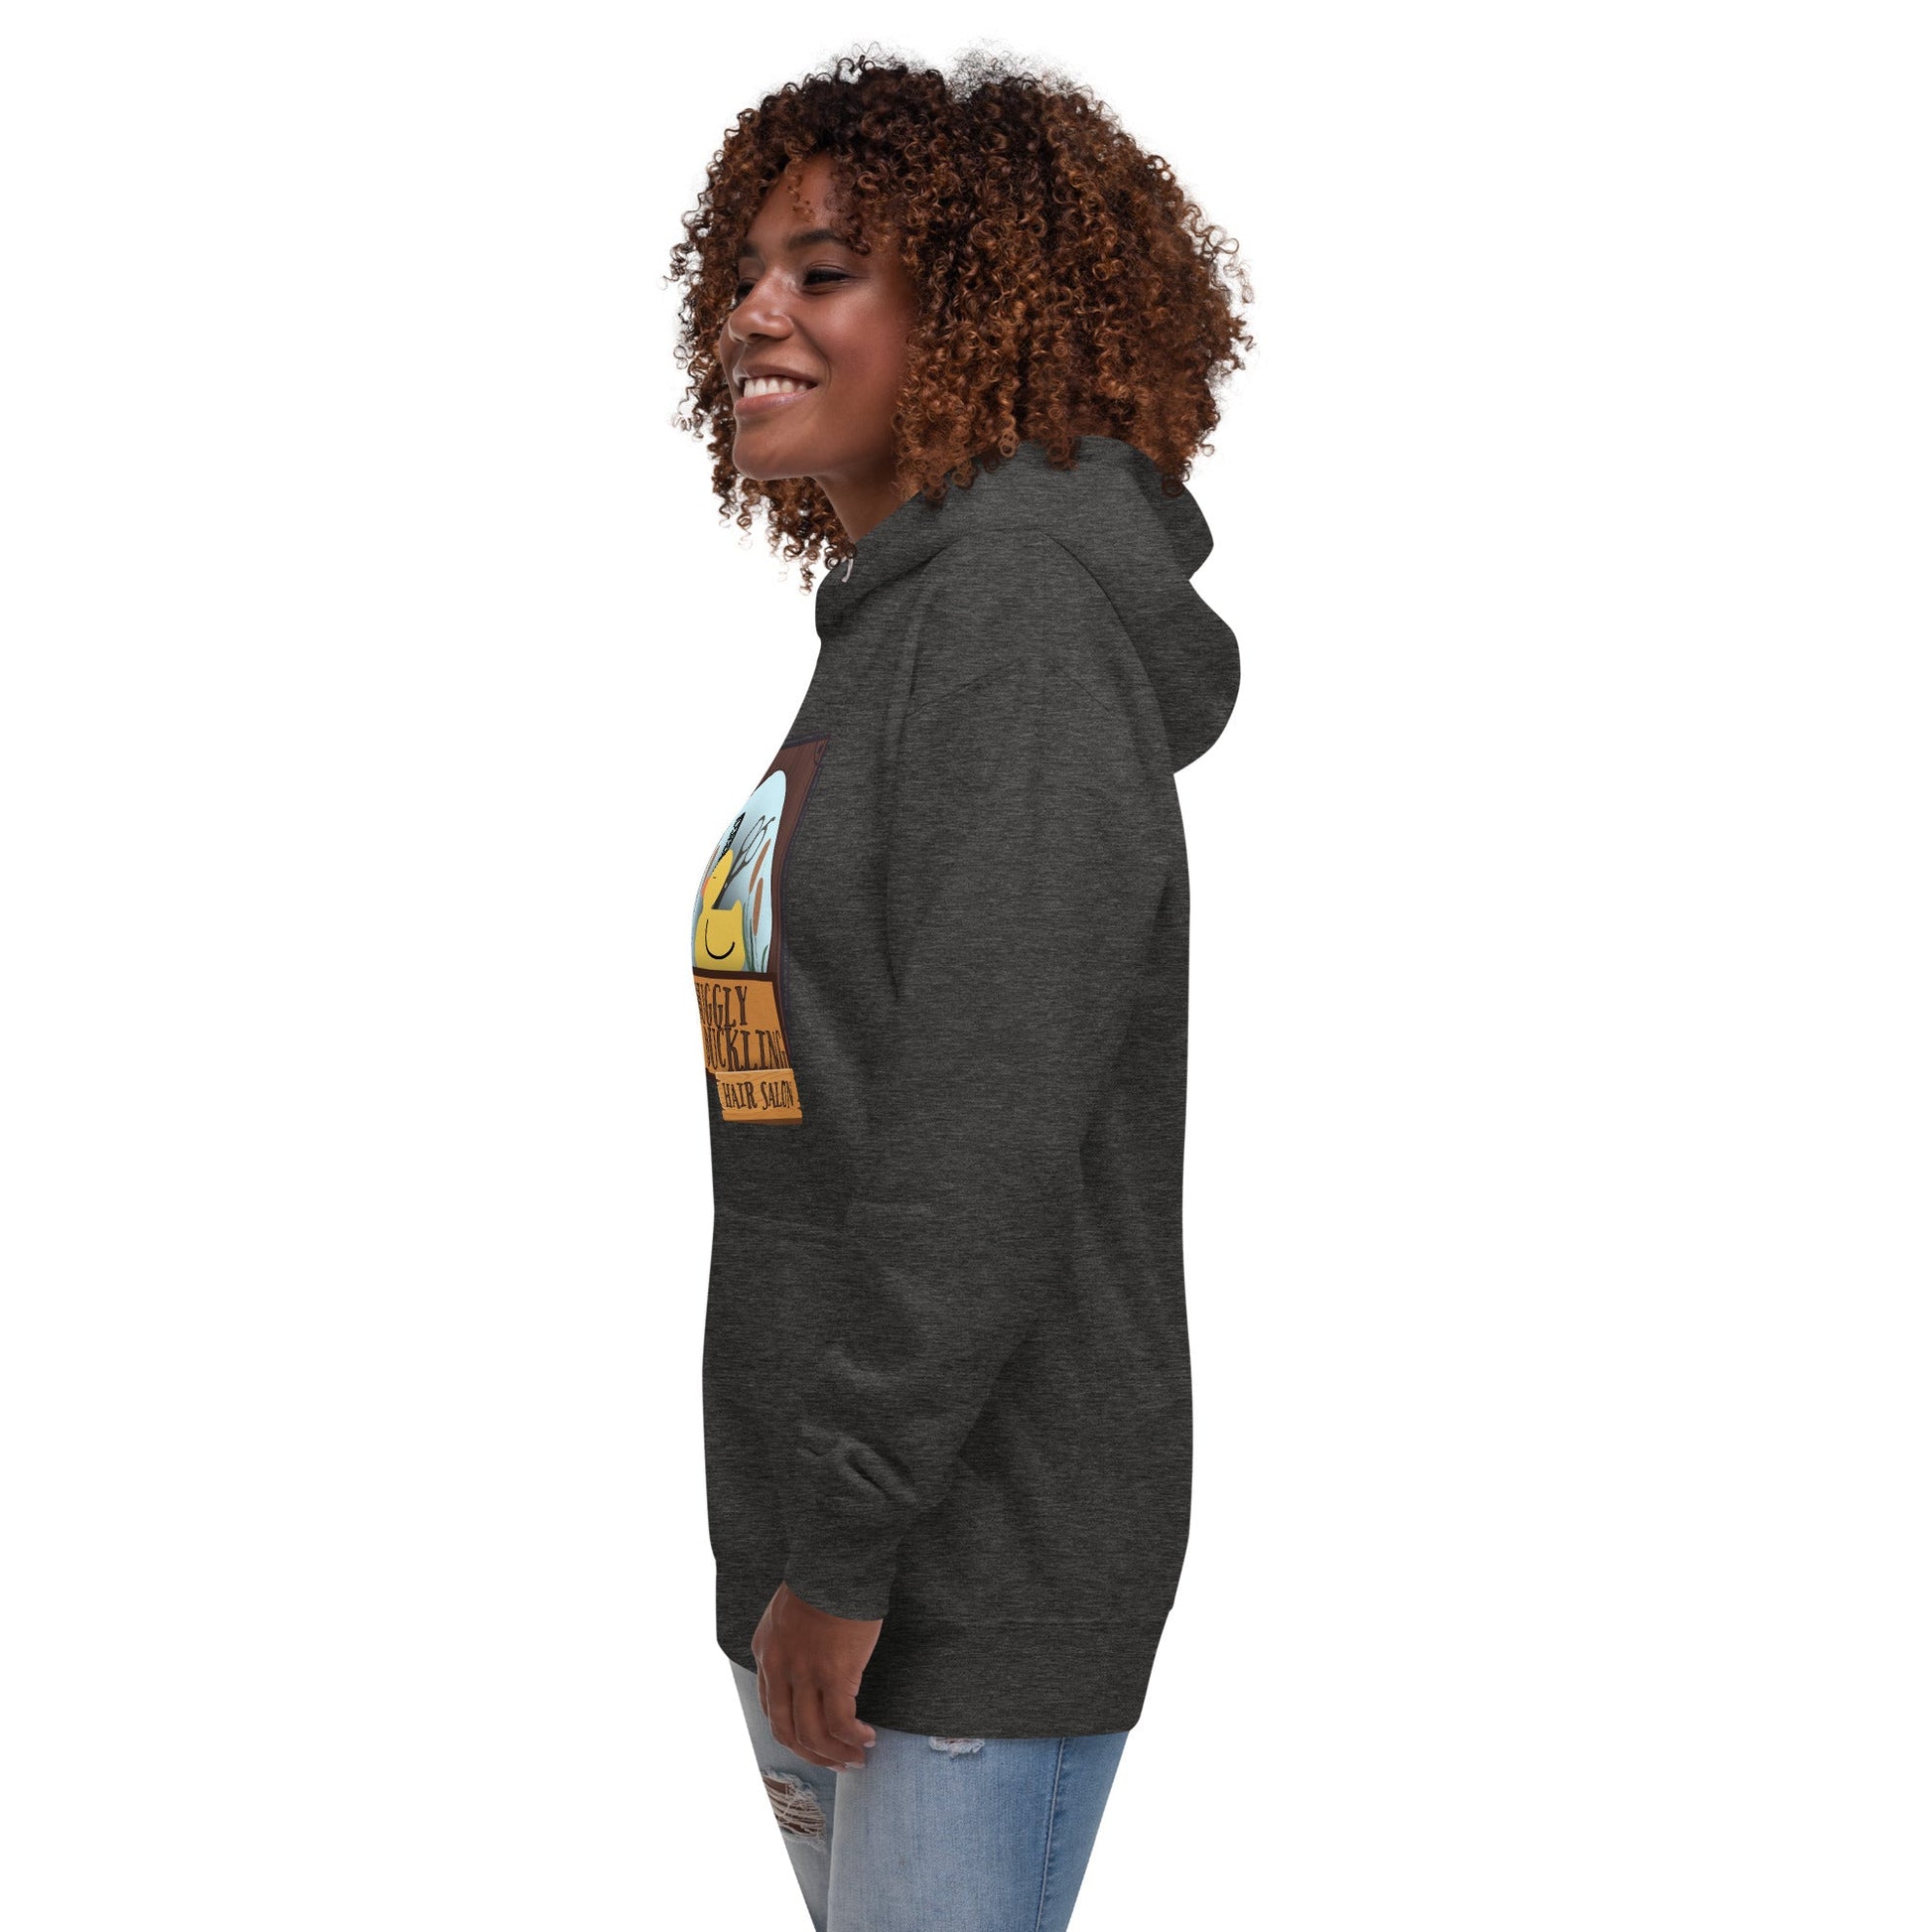 Snuggly Duckling Salon Unisex Hoodie adult hoodieadult tangledAdult T-ShirtWrong Lever Clothing